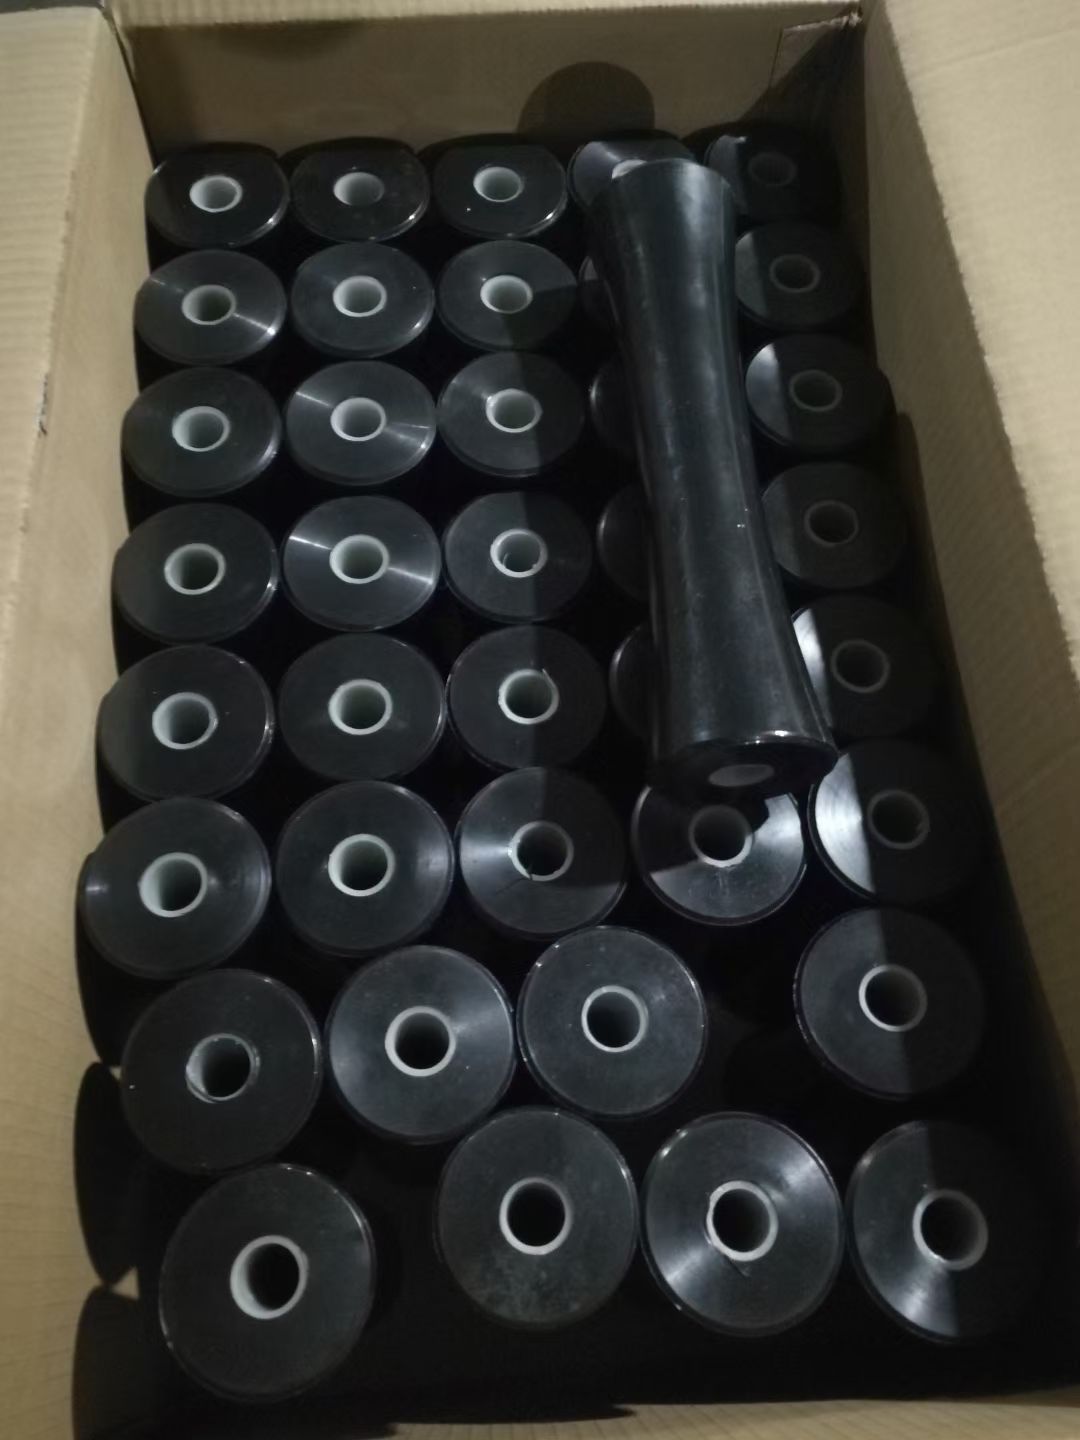 Rubber Plastic rollers wheels for yachts and boats for Chinese manufacturers and factories.